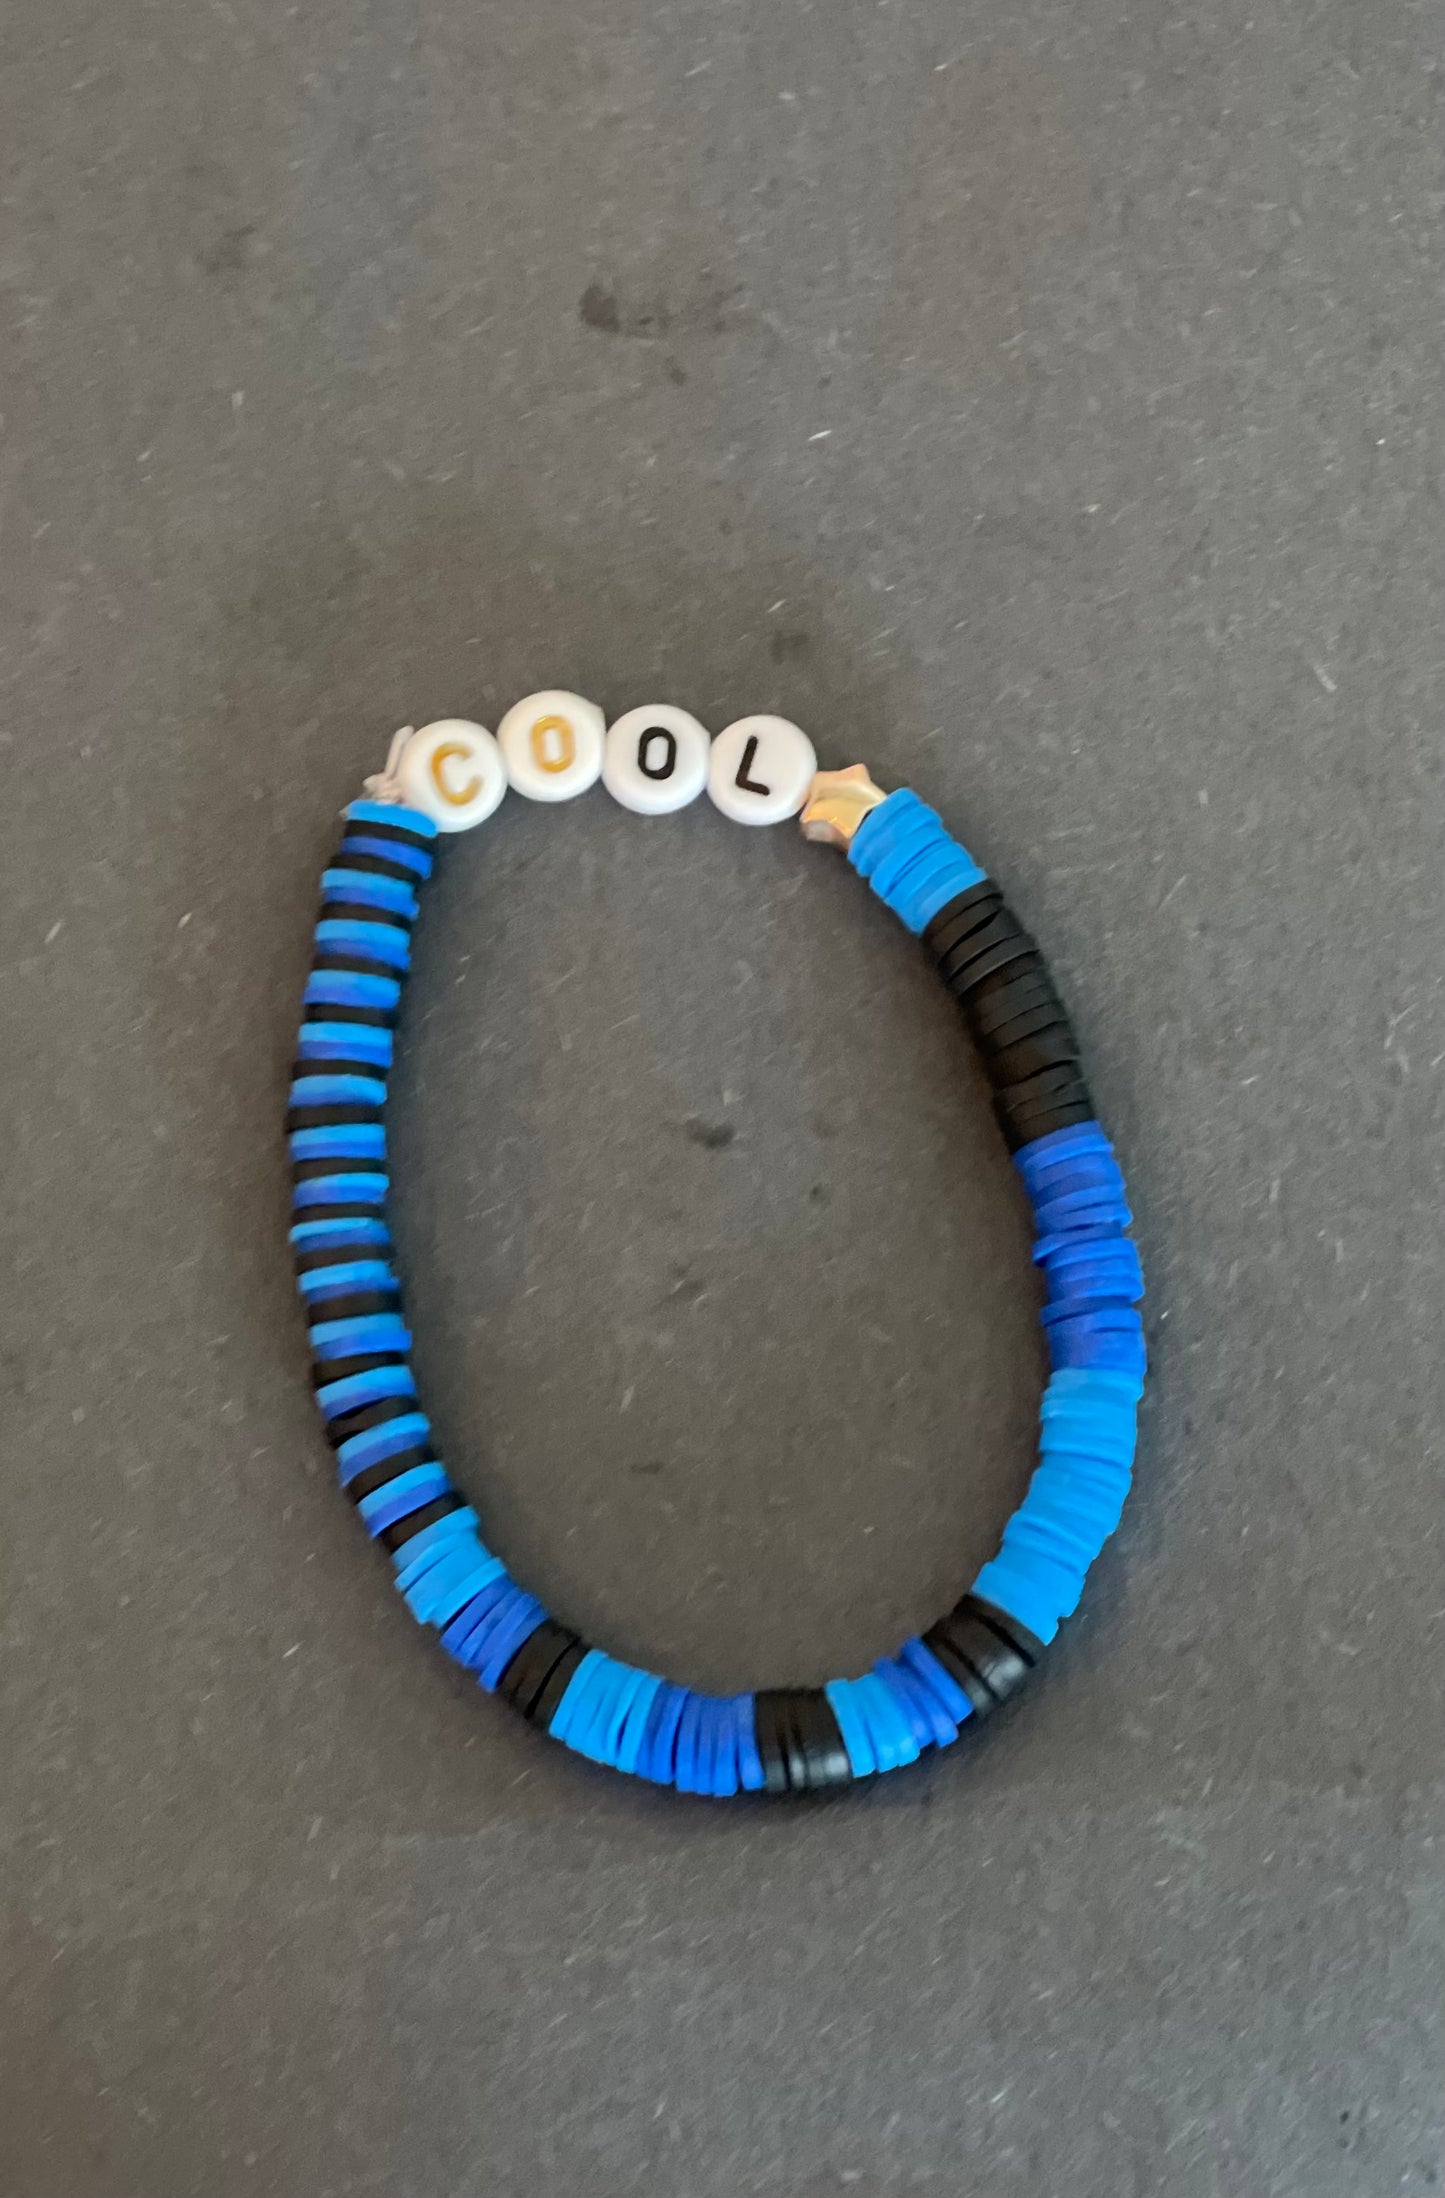 The Blue and Cool Bracelet